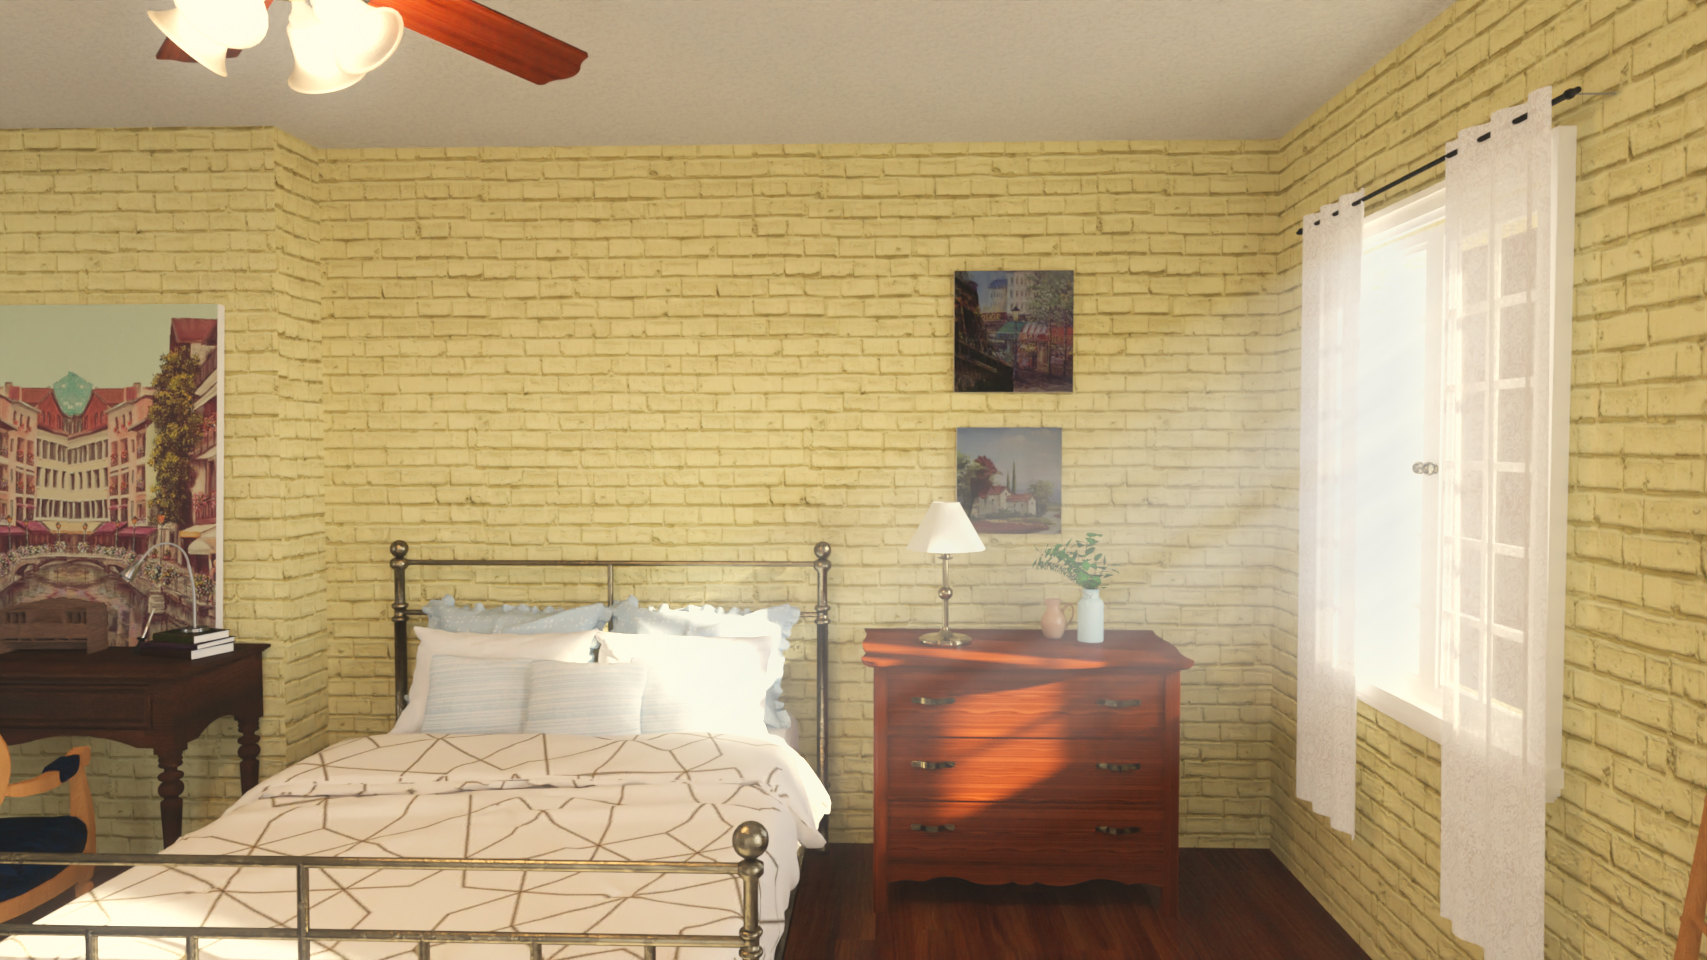 French Bedroom by: kubramatic, 3D Models by Daz 3D